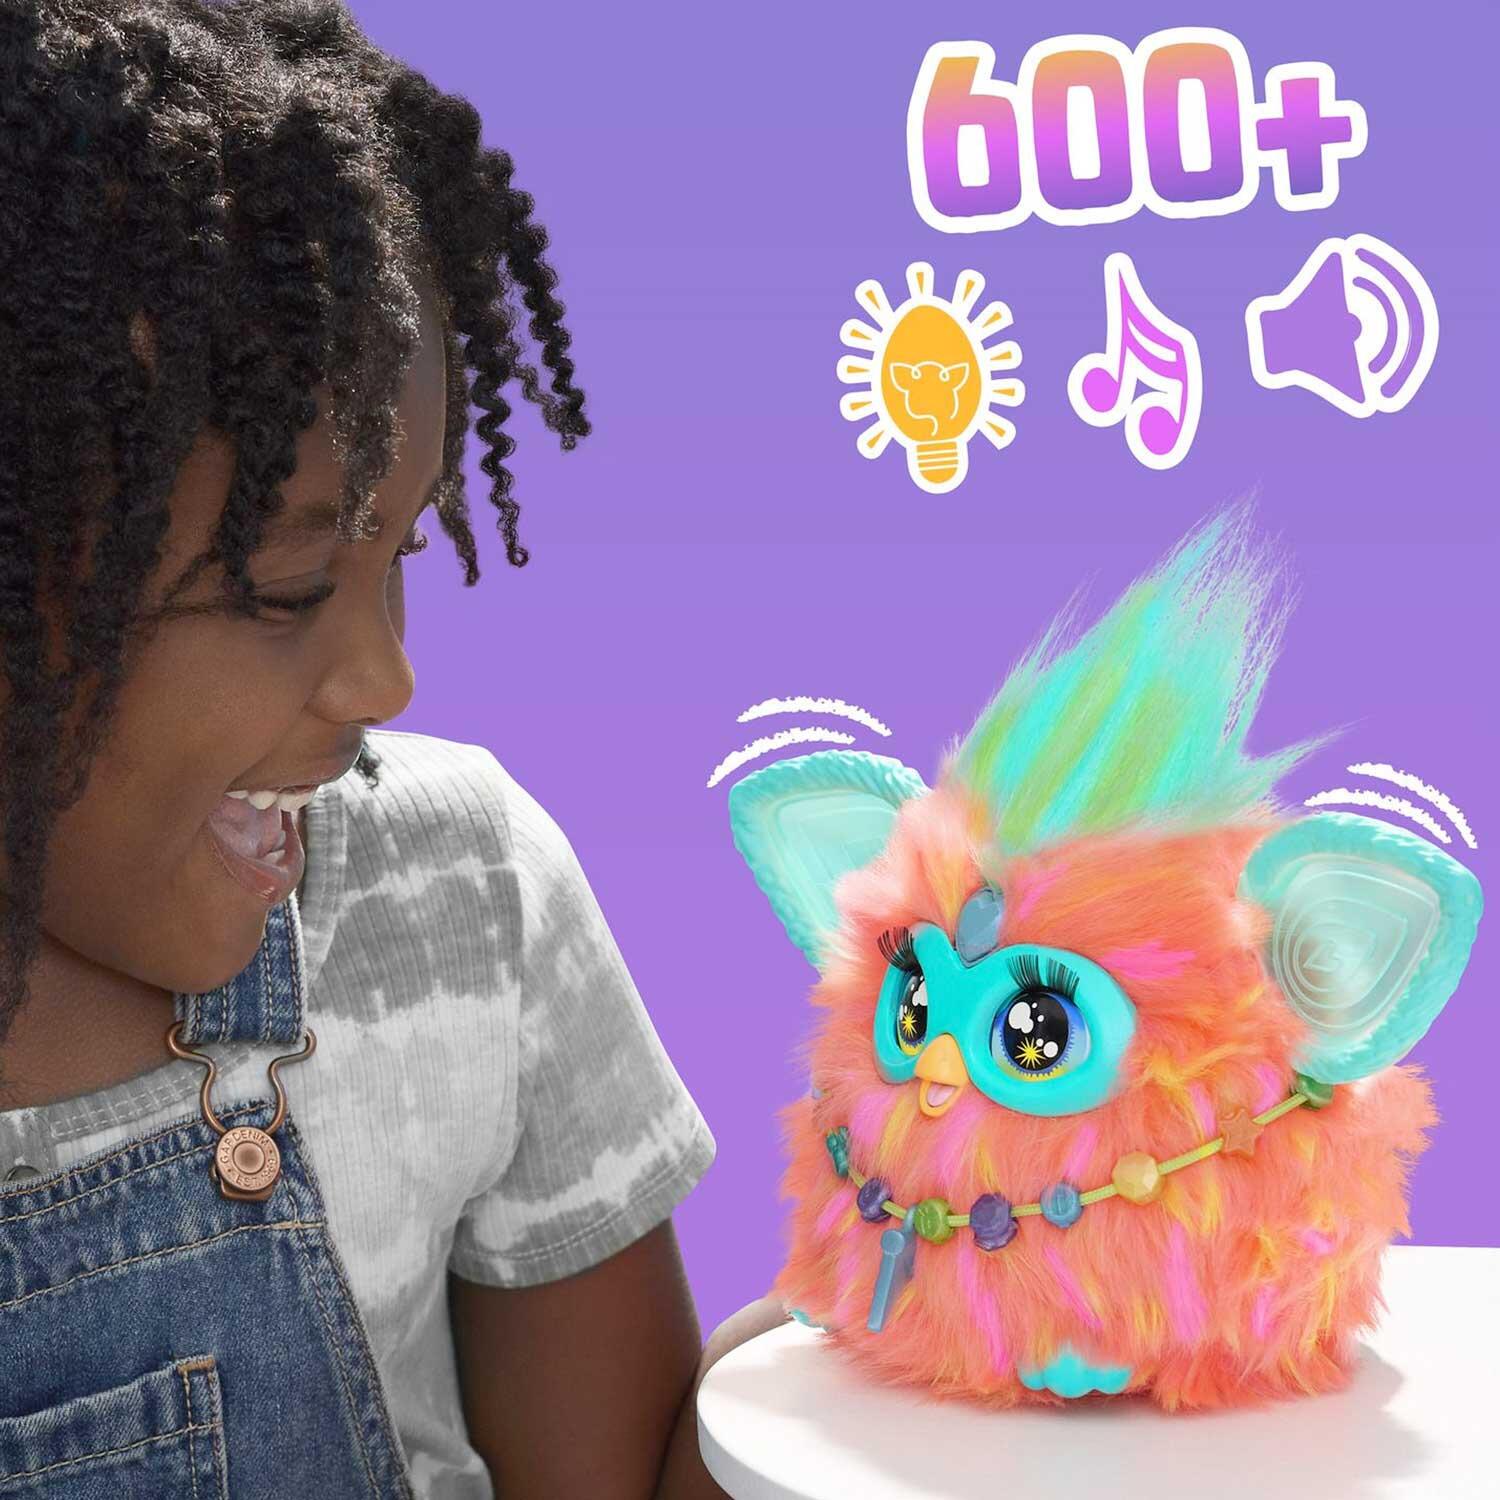 Hasbro Furby Coral Interactive Plush Toy with over 600 responses